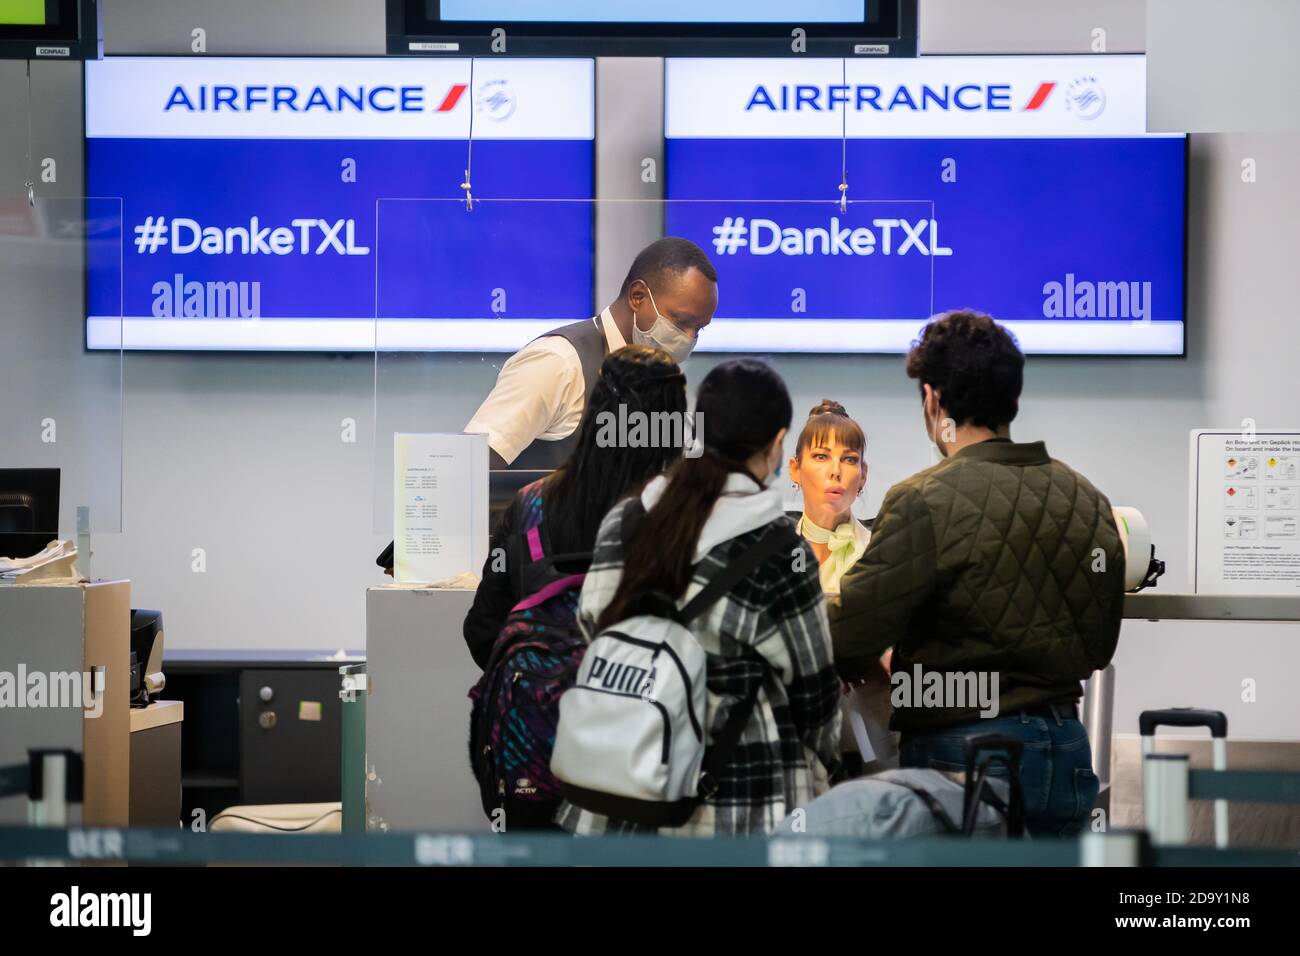 Berlin, Germany. 08th Nov, 2020. Passengers stand at the Air France  check-in counter in Terminal C at Tegel Airport to be checked in for the  last scheduled flight from Tegel to Paris.